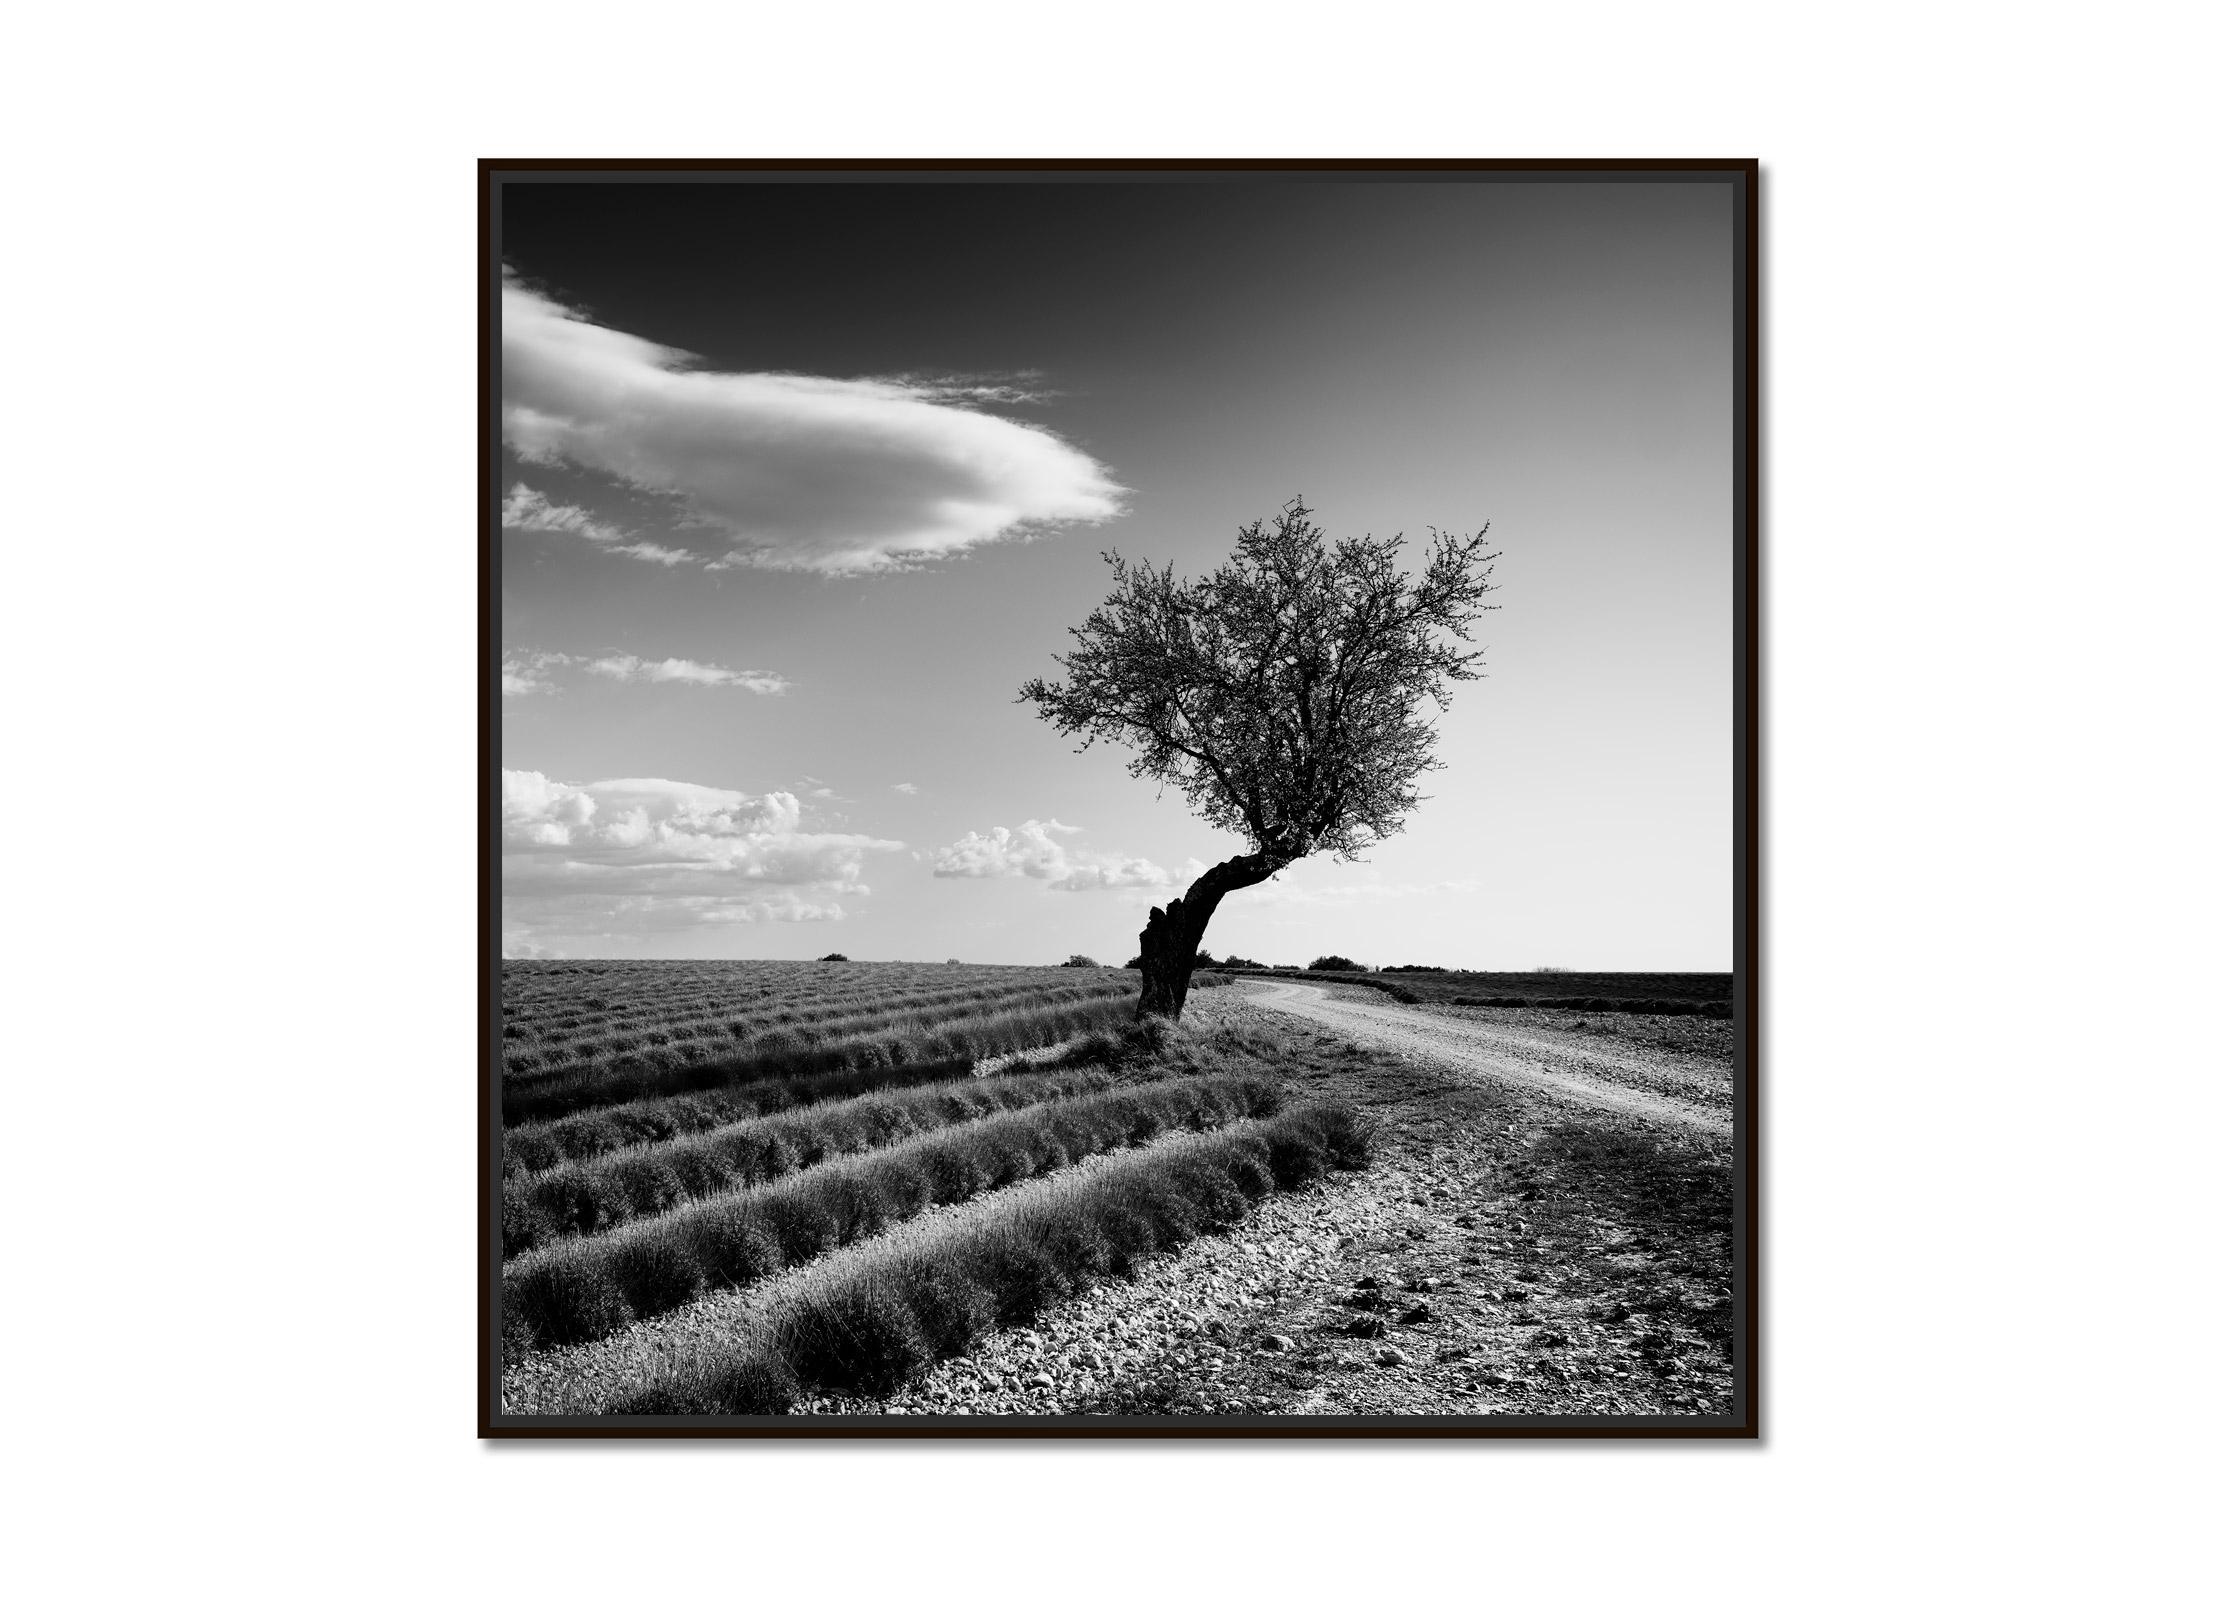 Lavender field lonely Tree, stranger clouds, France, black white landscape photo - Print by Gerald Berghammer